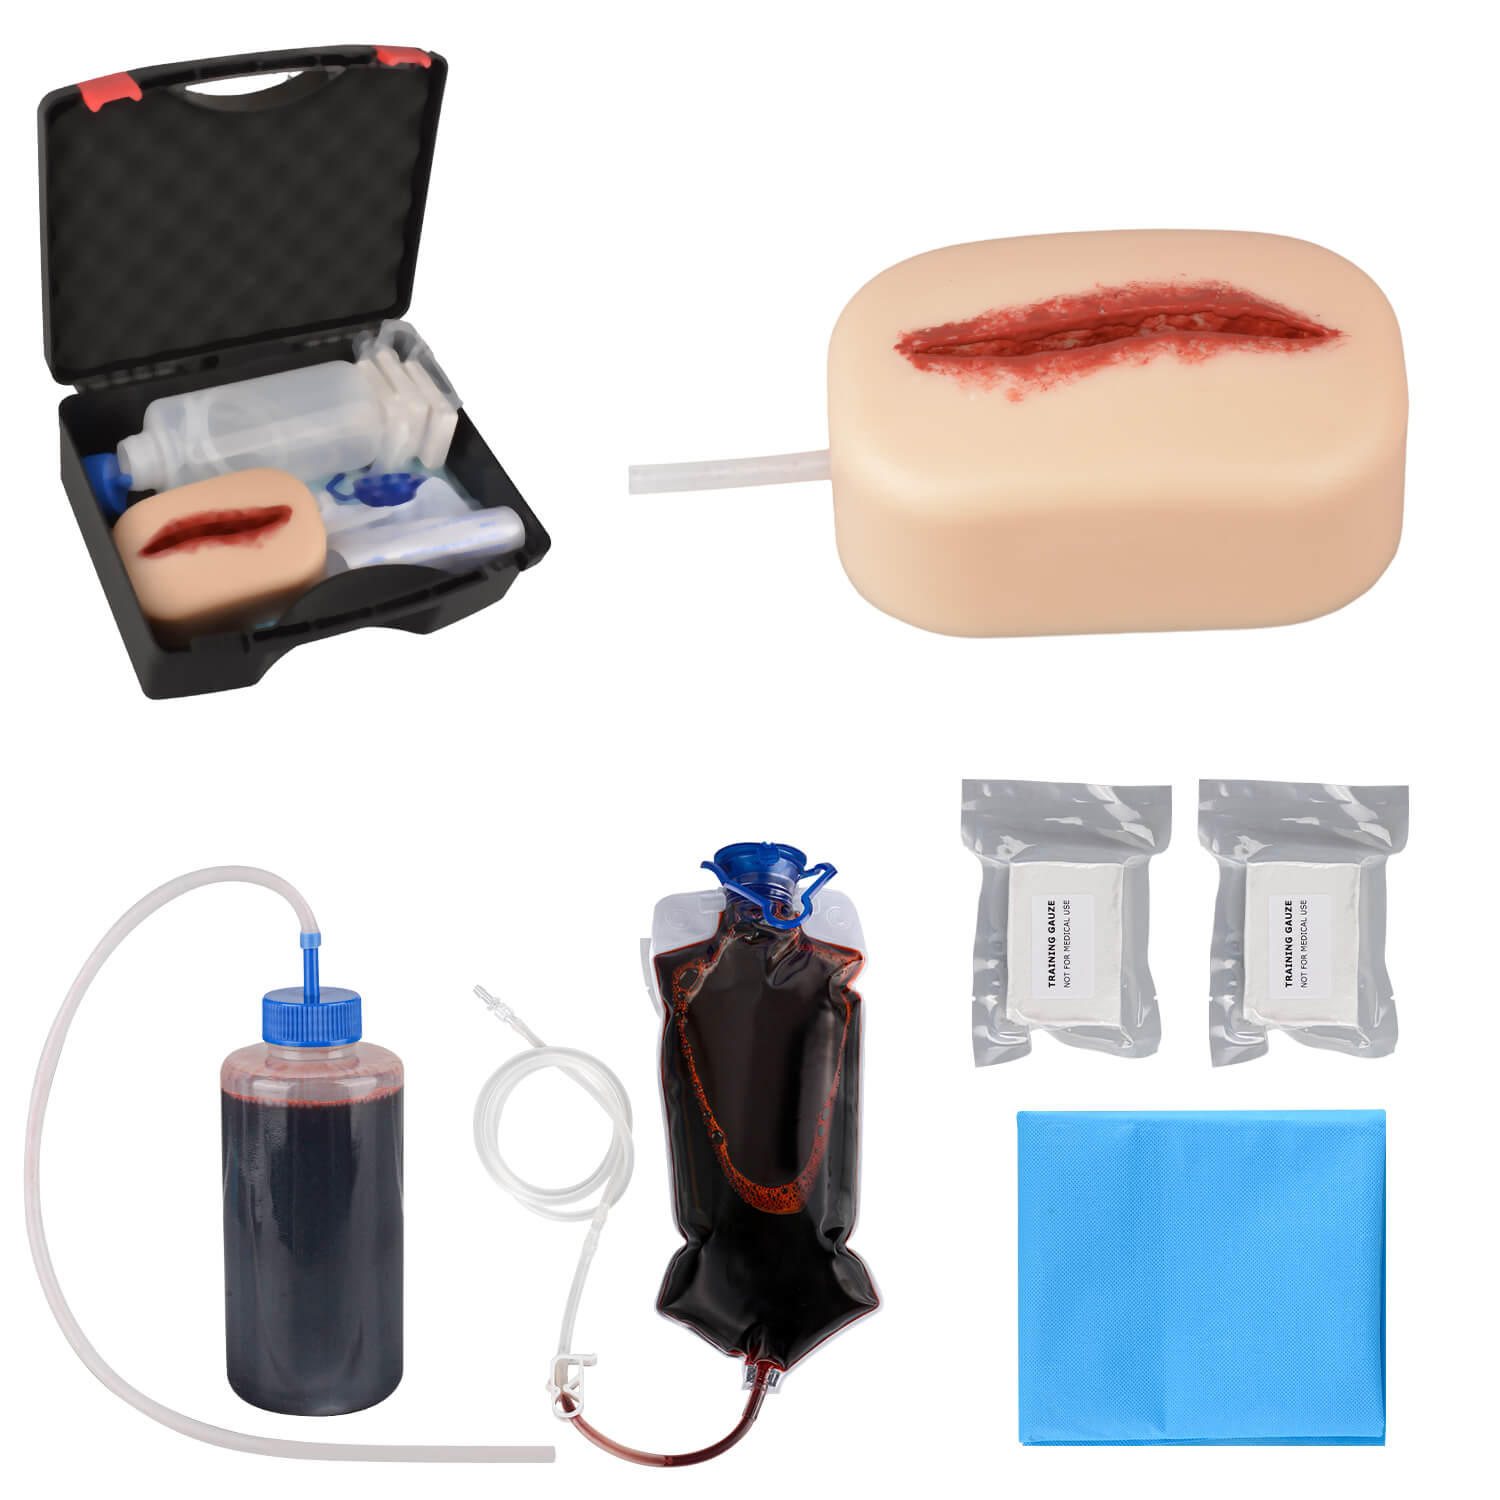 Laceration Wound Hemorrhage Control Trainer Kit